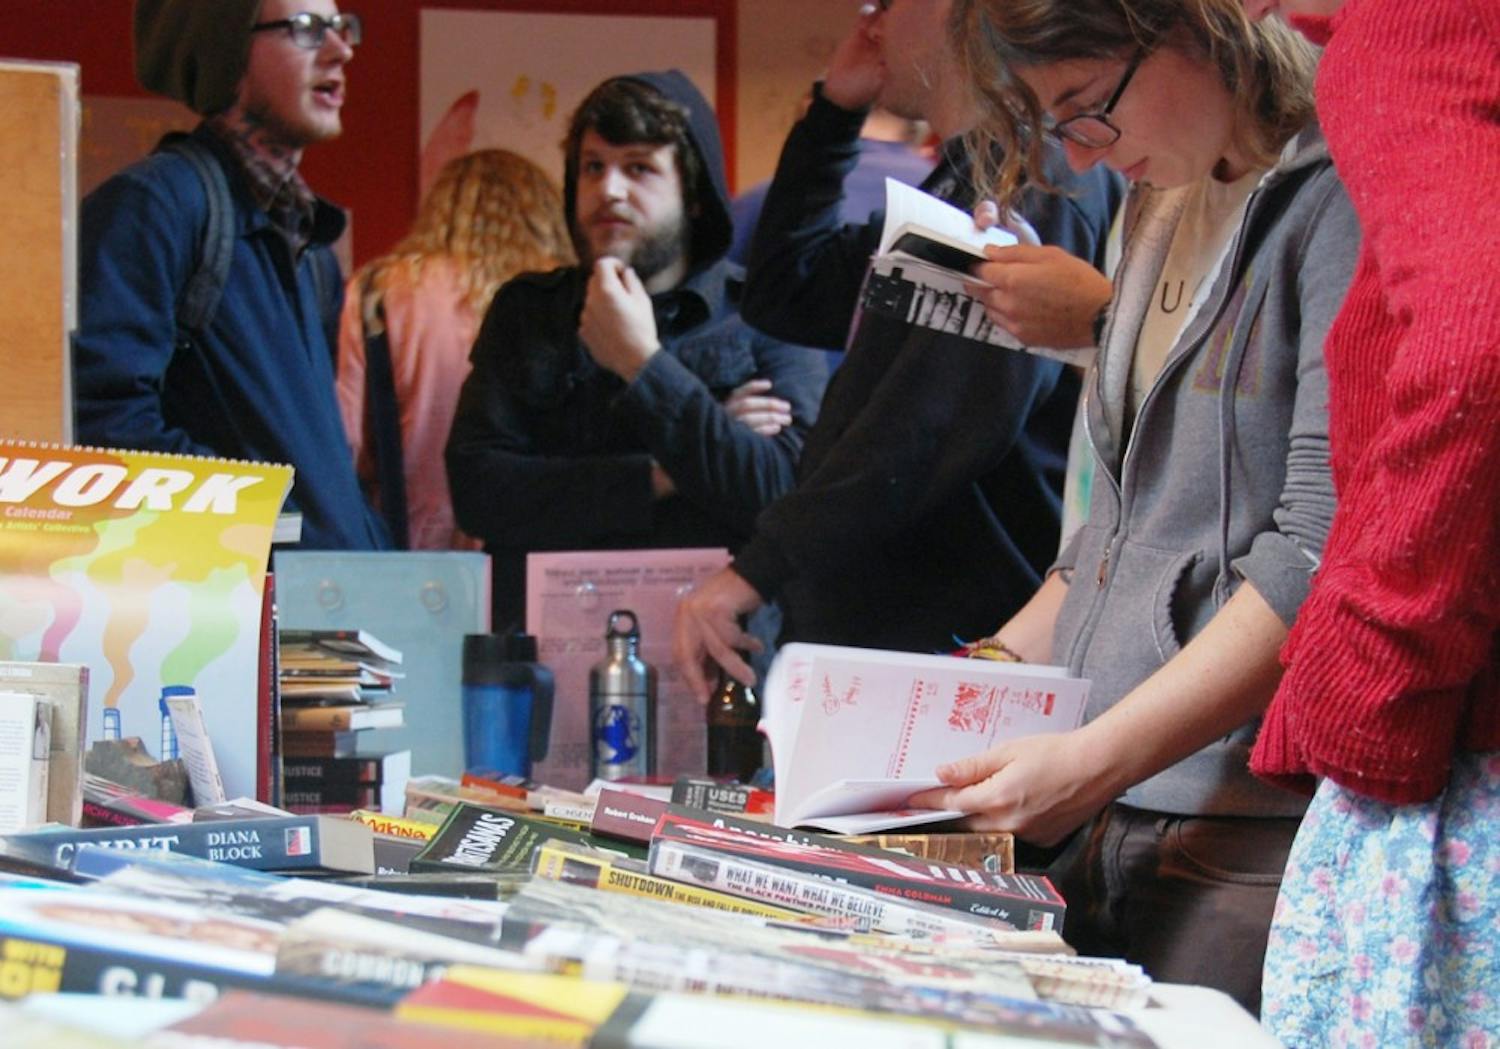 Community members browse through book selections at the area’s first Anarchist Bookfair held at the Nighlight Club on Saturday.